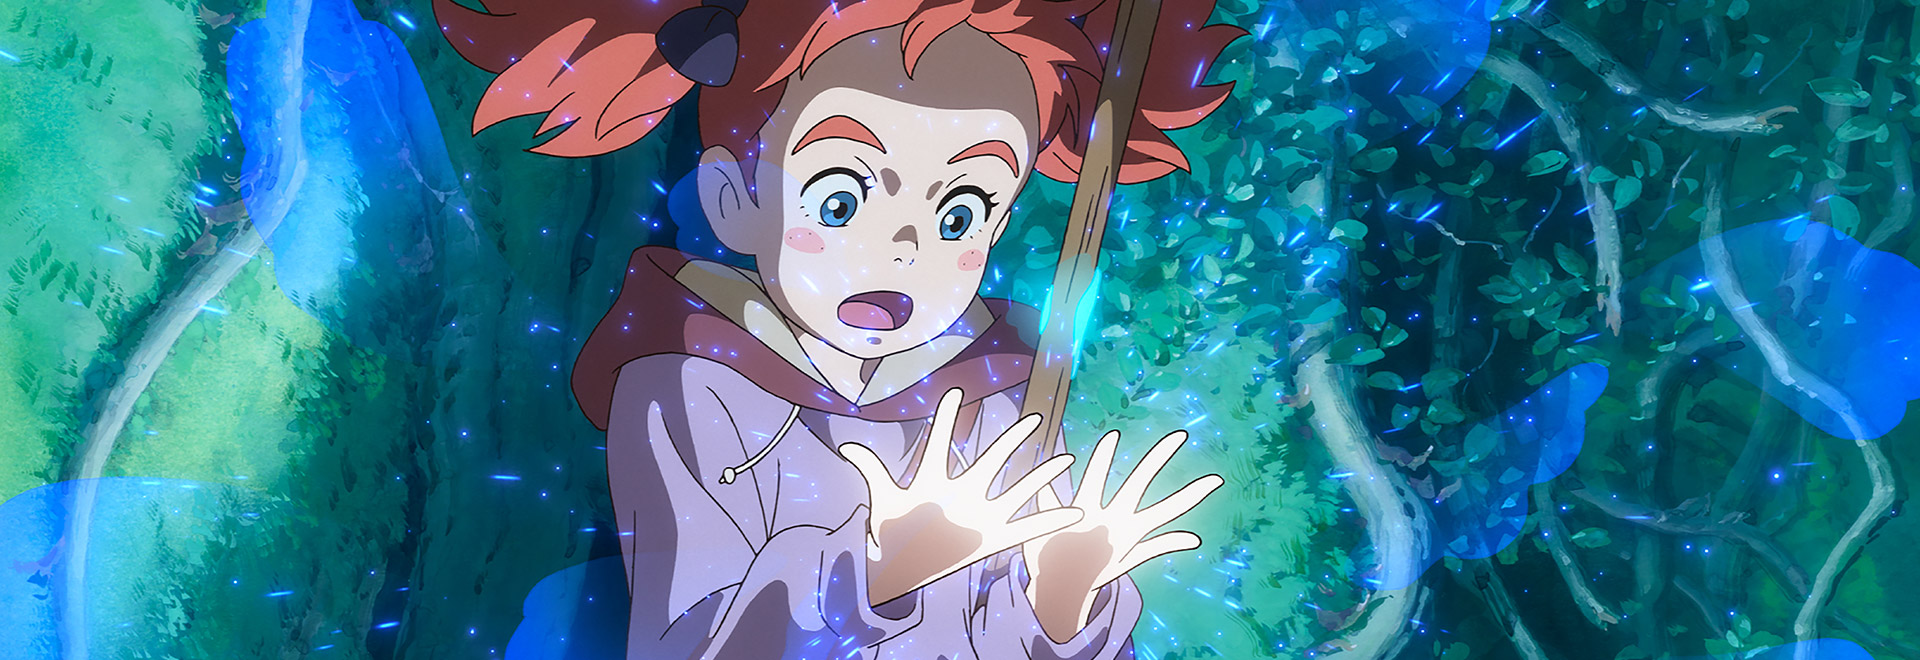 Mary And The Witch's Flower - More magic required